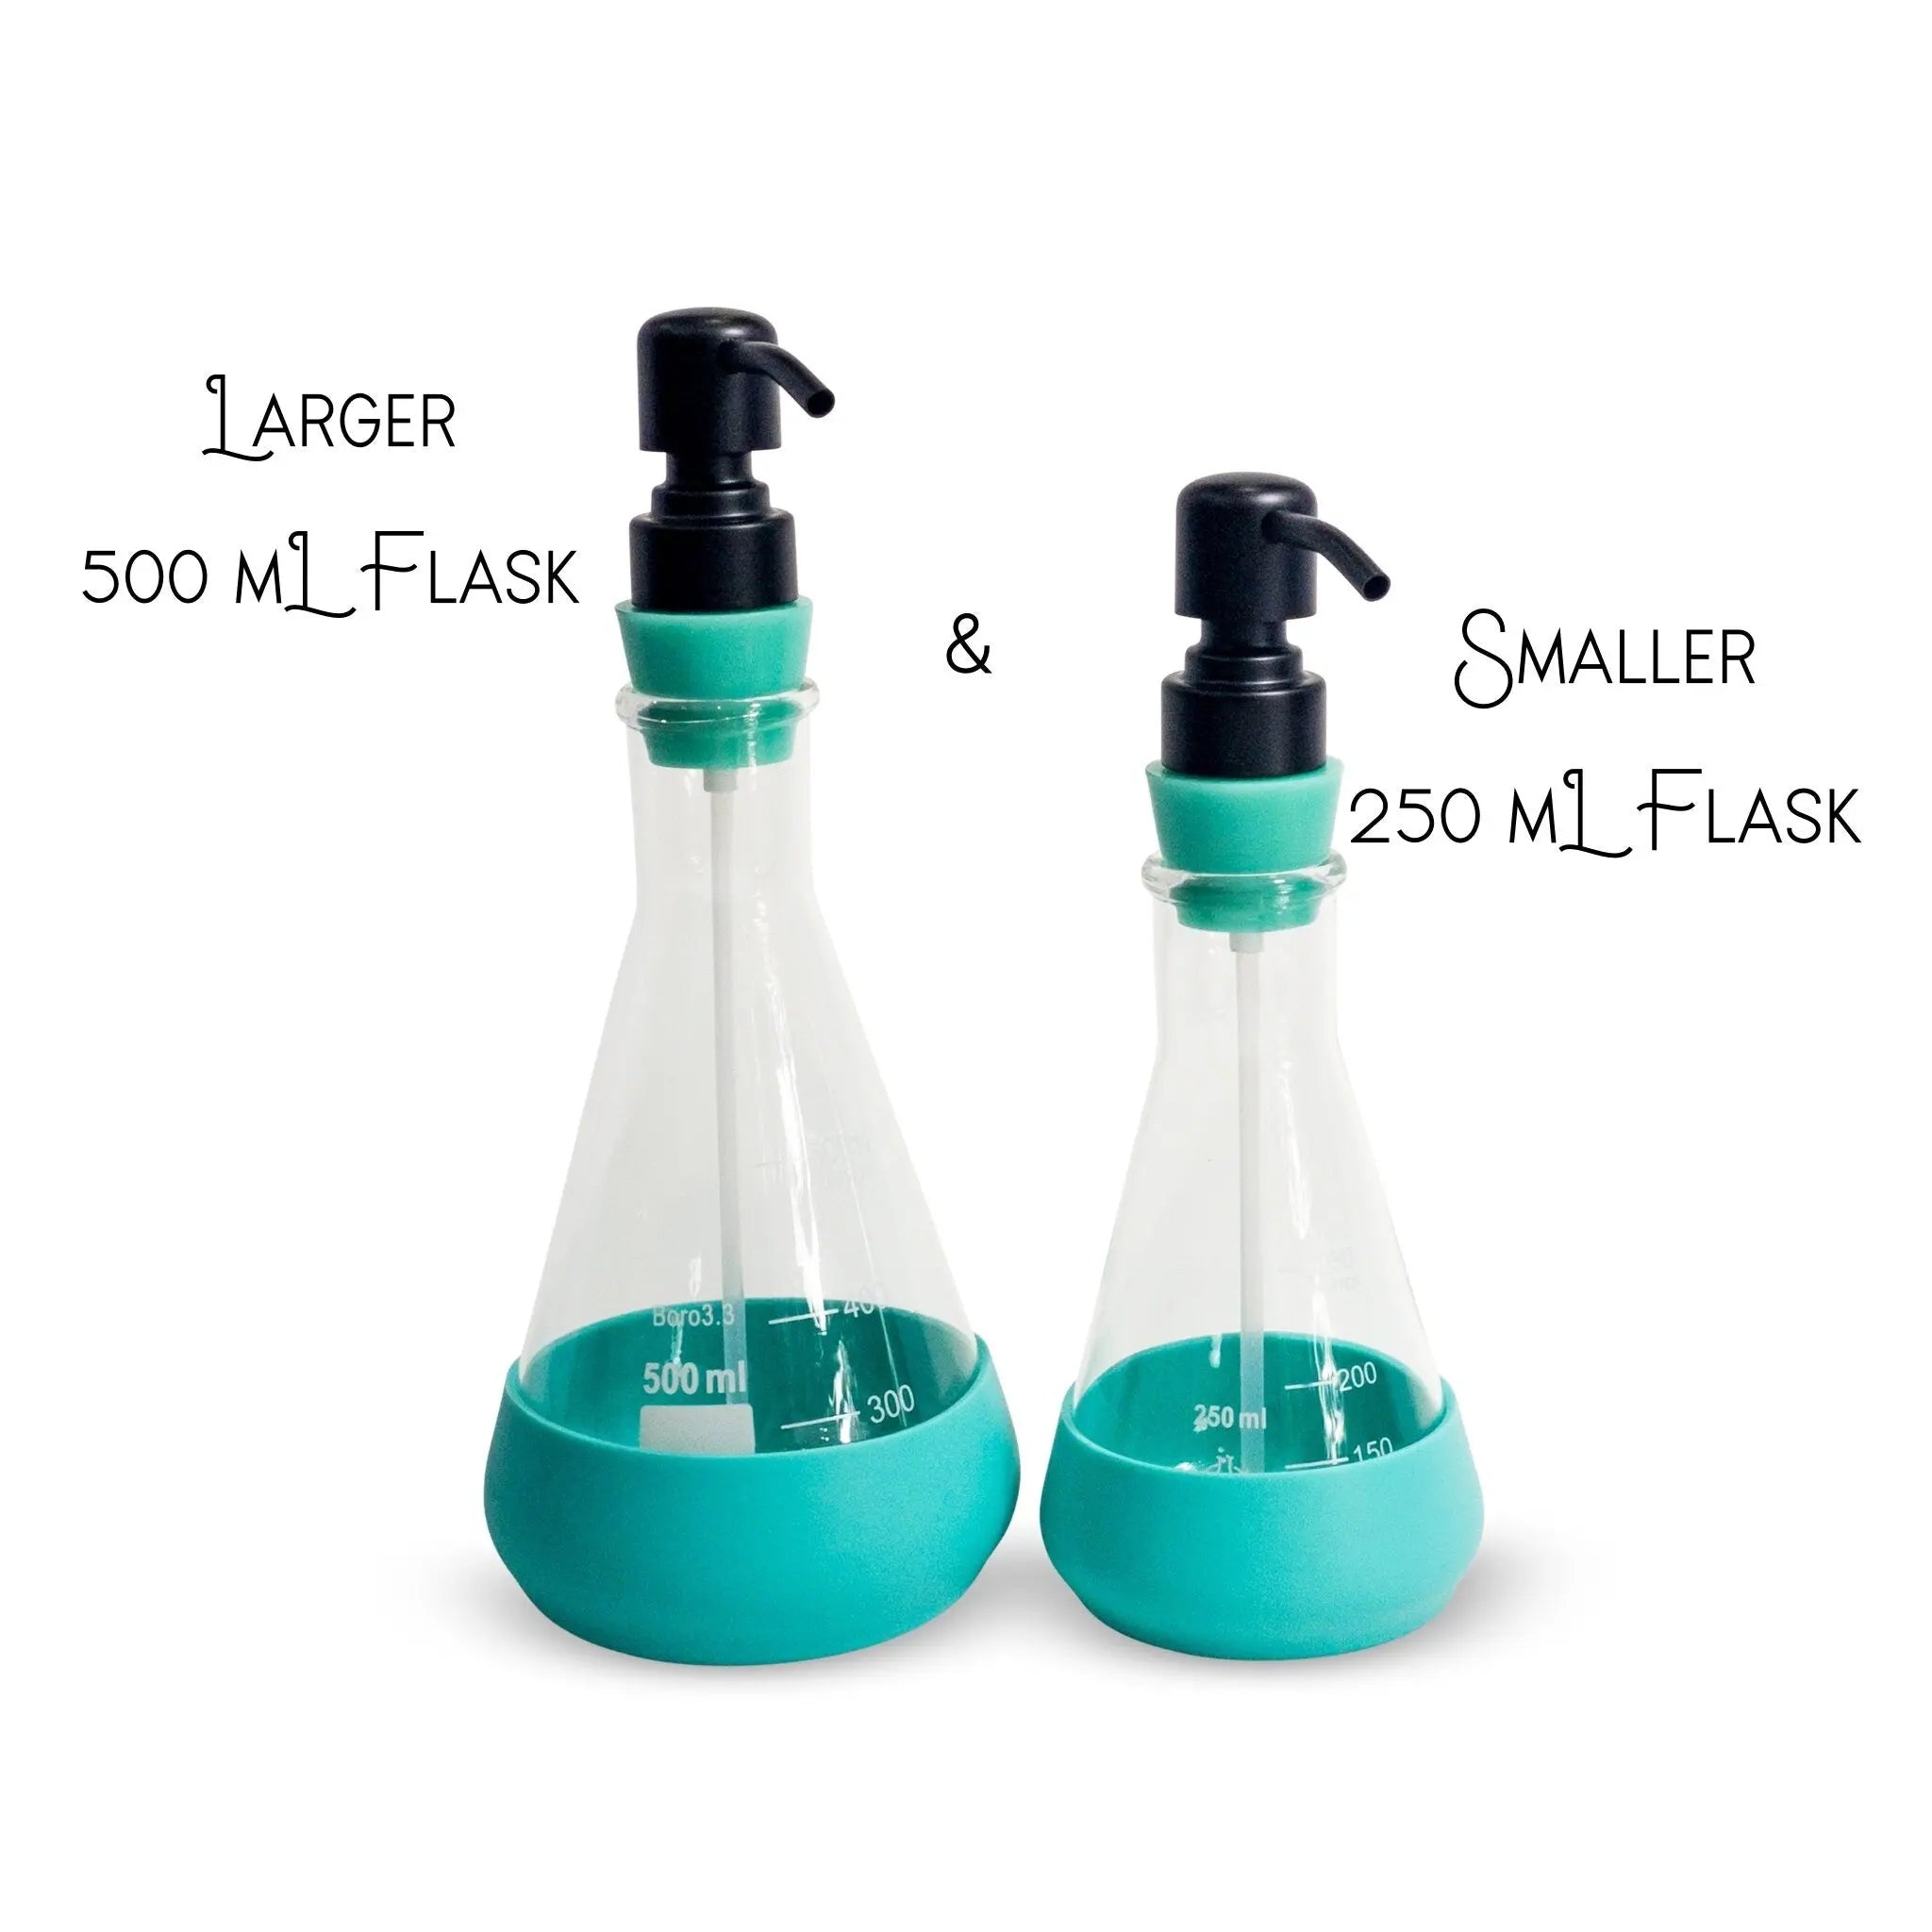 Chemistry Soap Dispenser | Larger Clear Flask | Silicone & Pump Top Options | Chemistry Teacher Gift